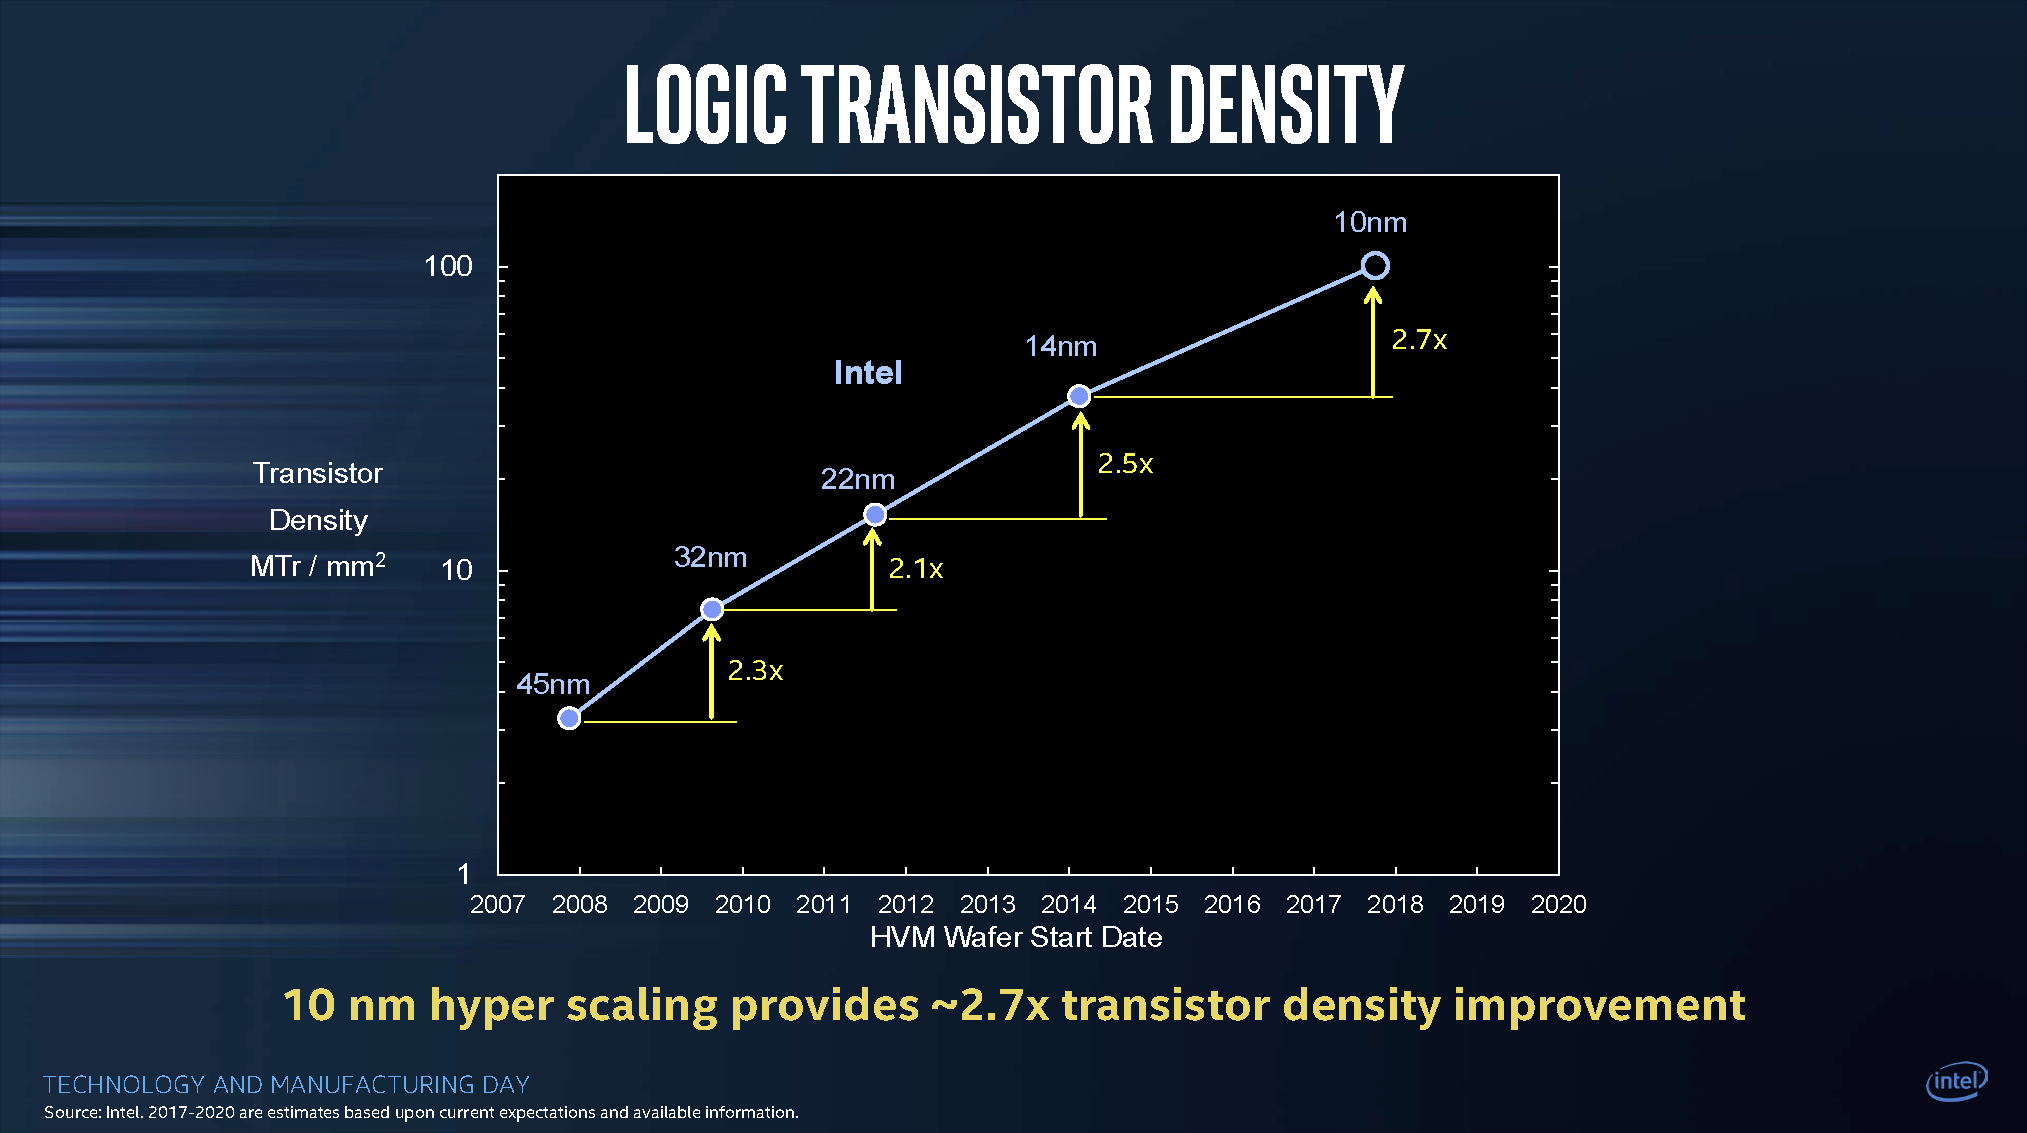 Intel Processor Transistor Count Chart From 1971 To 2015